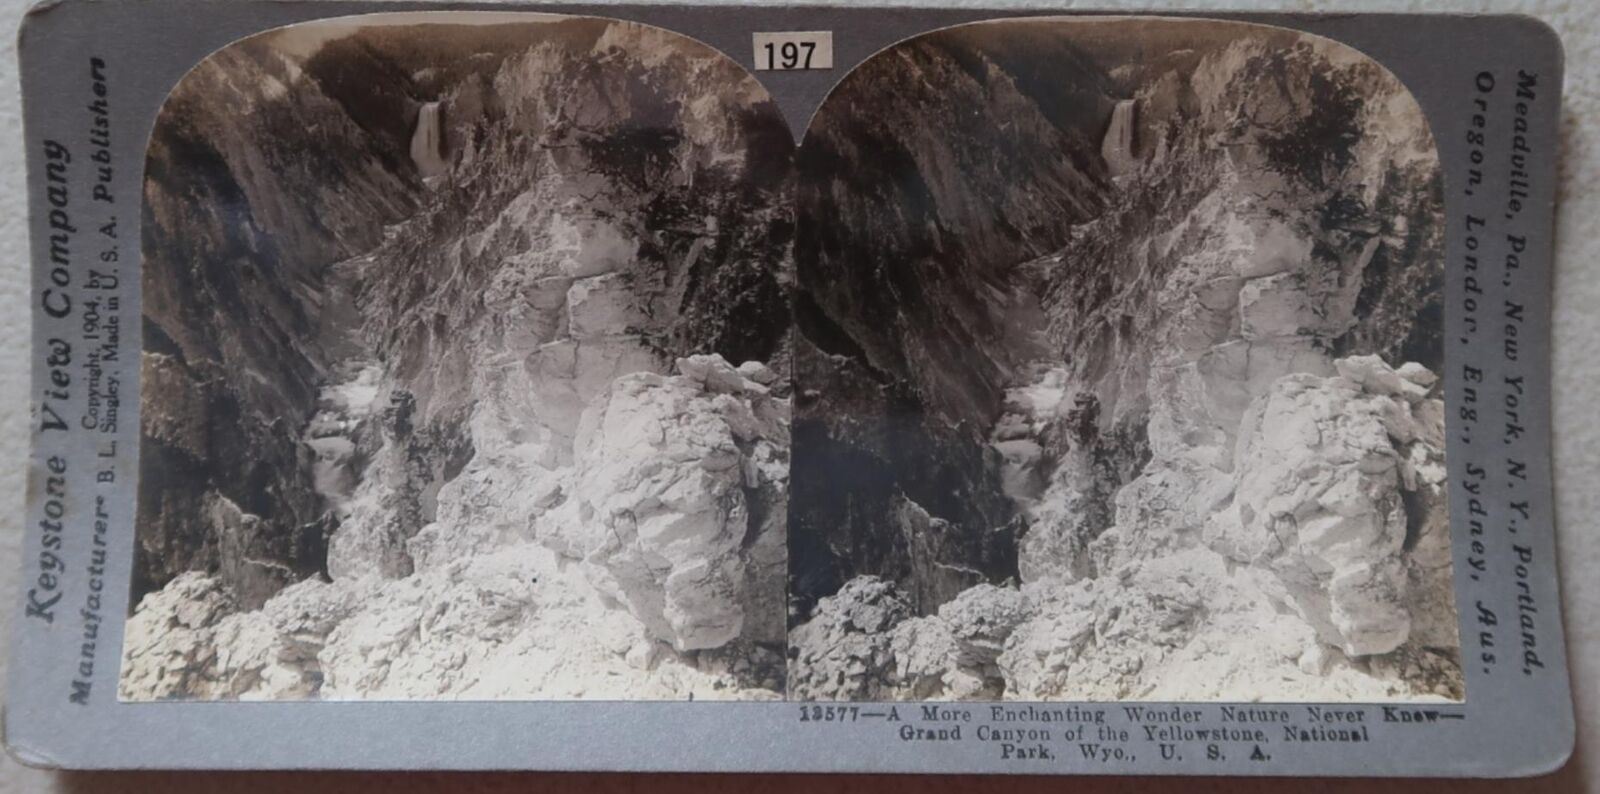 1901 WYOMING GRAND CANYON OF THE YELLOWSTONE NATIONAL PARK STEREOVIEW 33-60